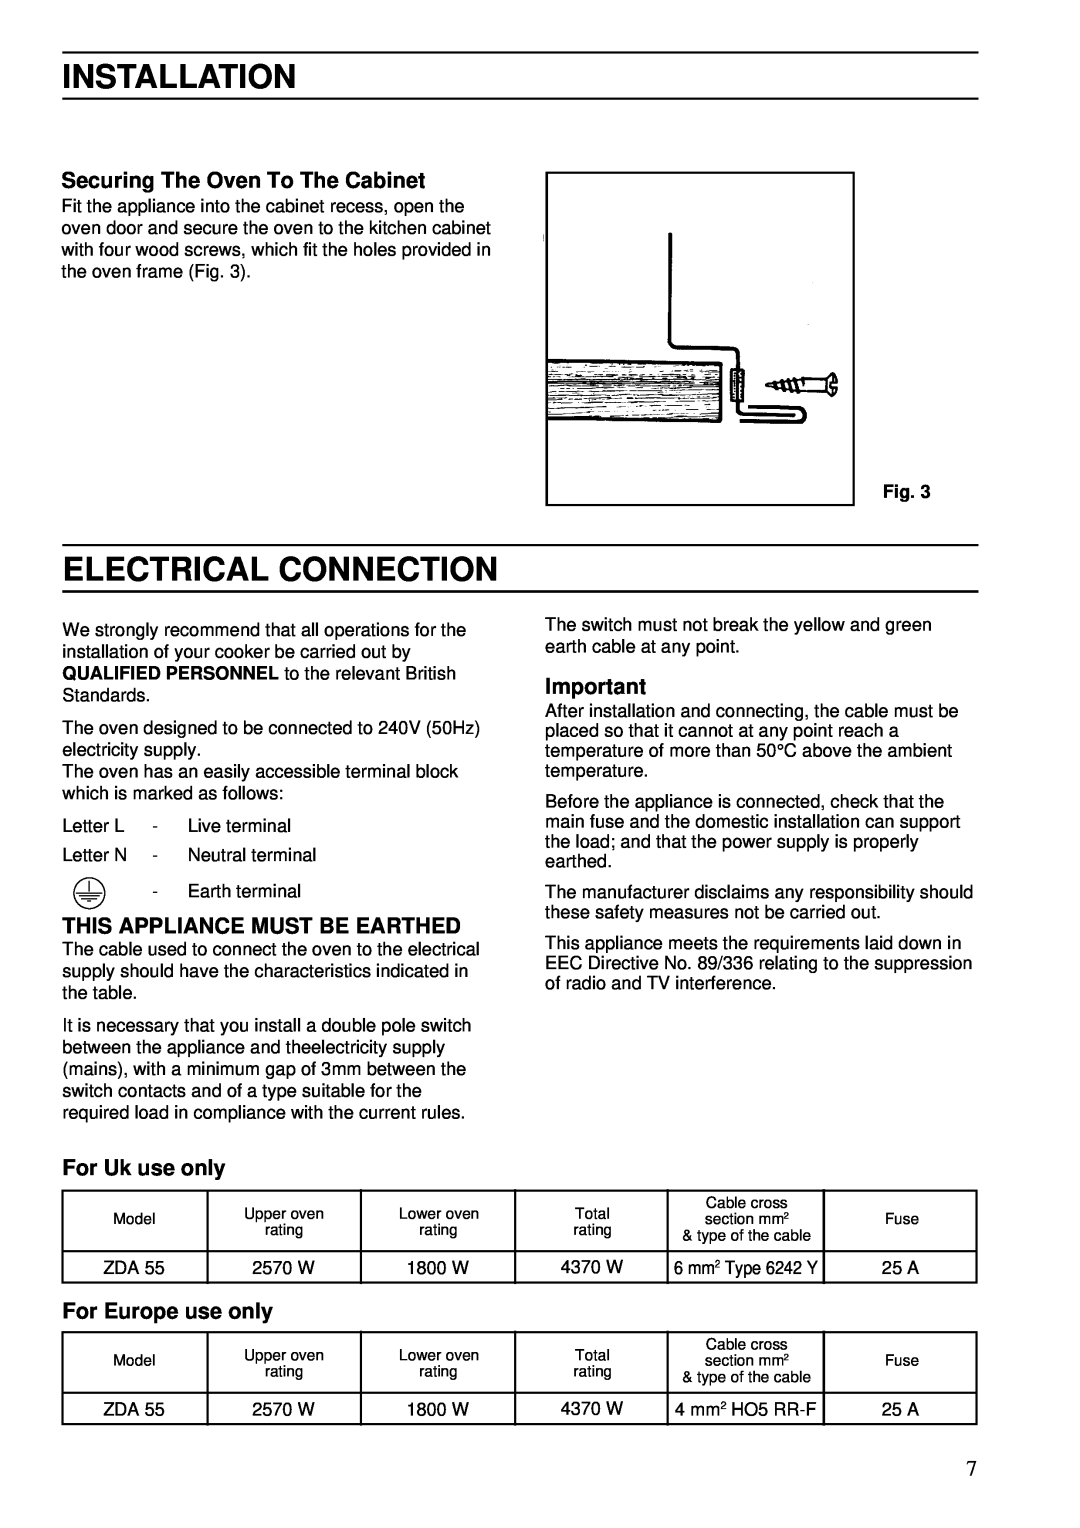 Zanussi ZDA 45 Electrical Connection, Installation, Securing The Oven To The Cabinet, This Appliance Must Be Earthed 